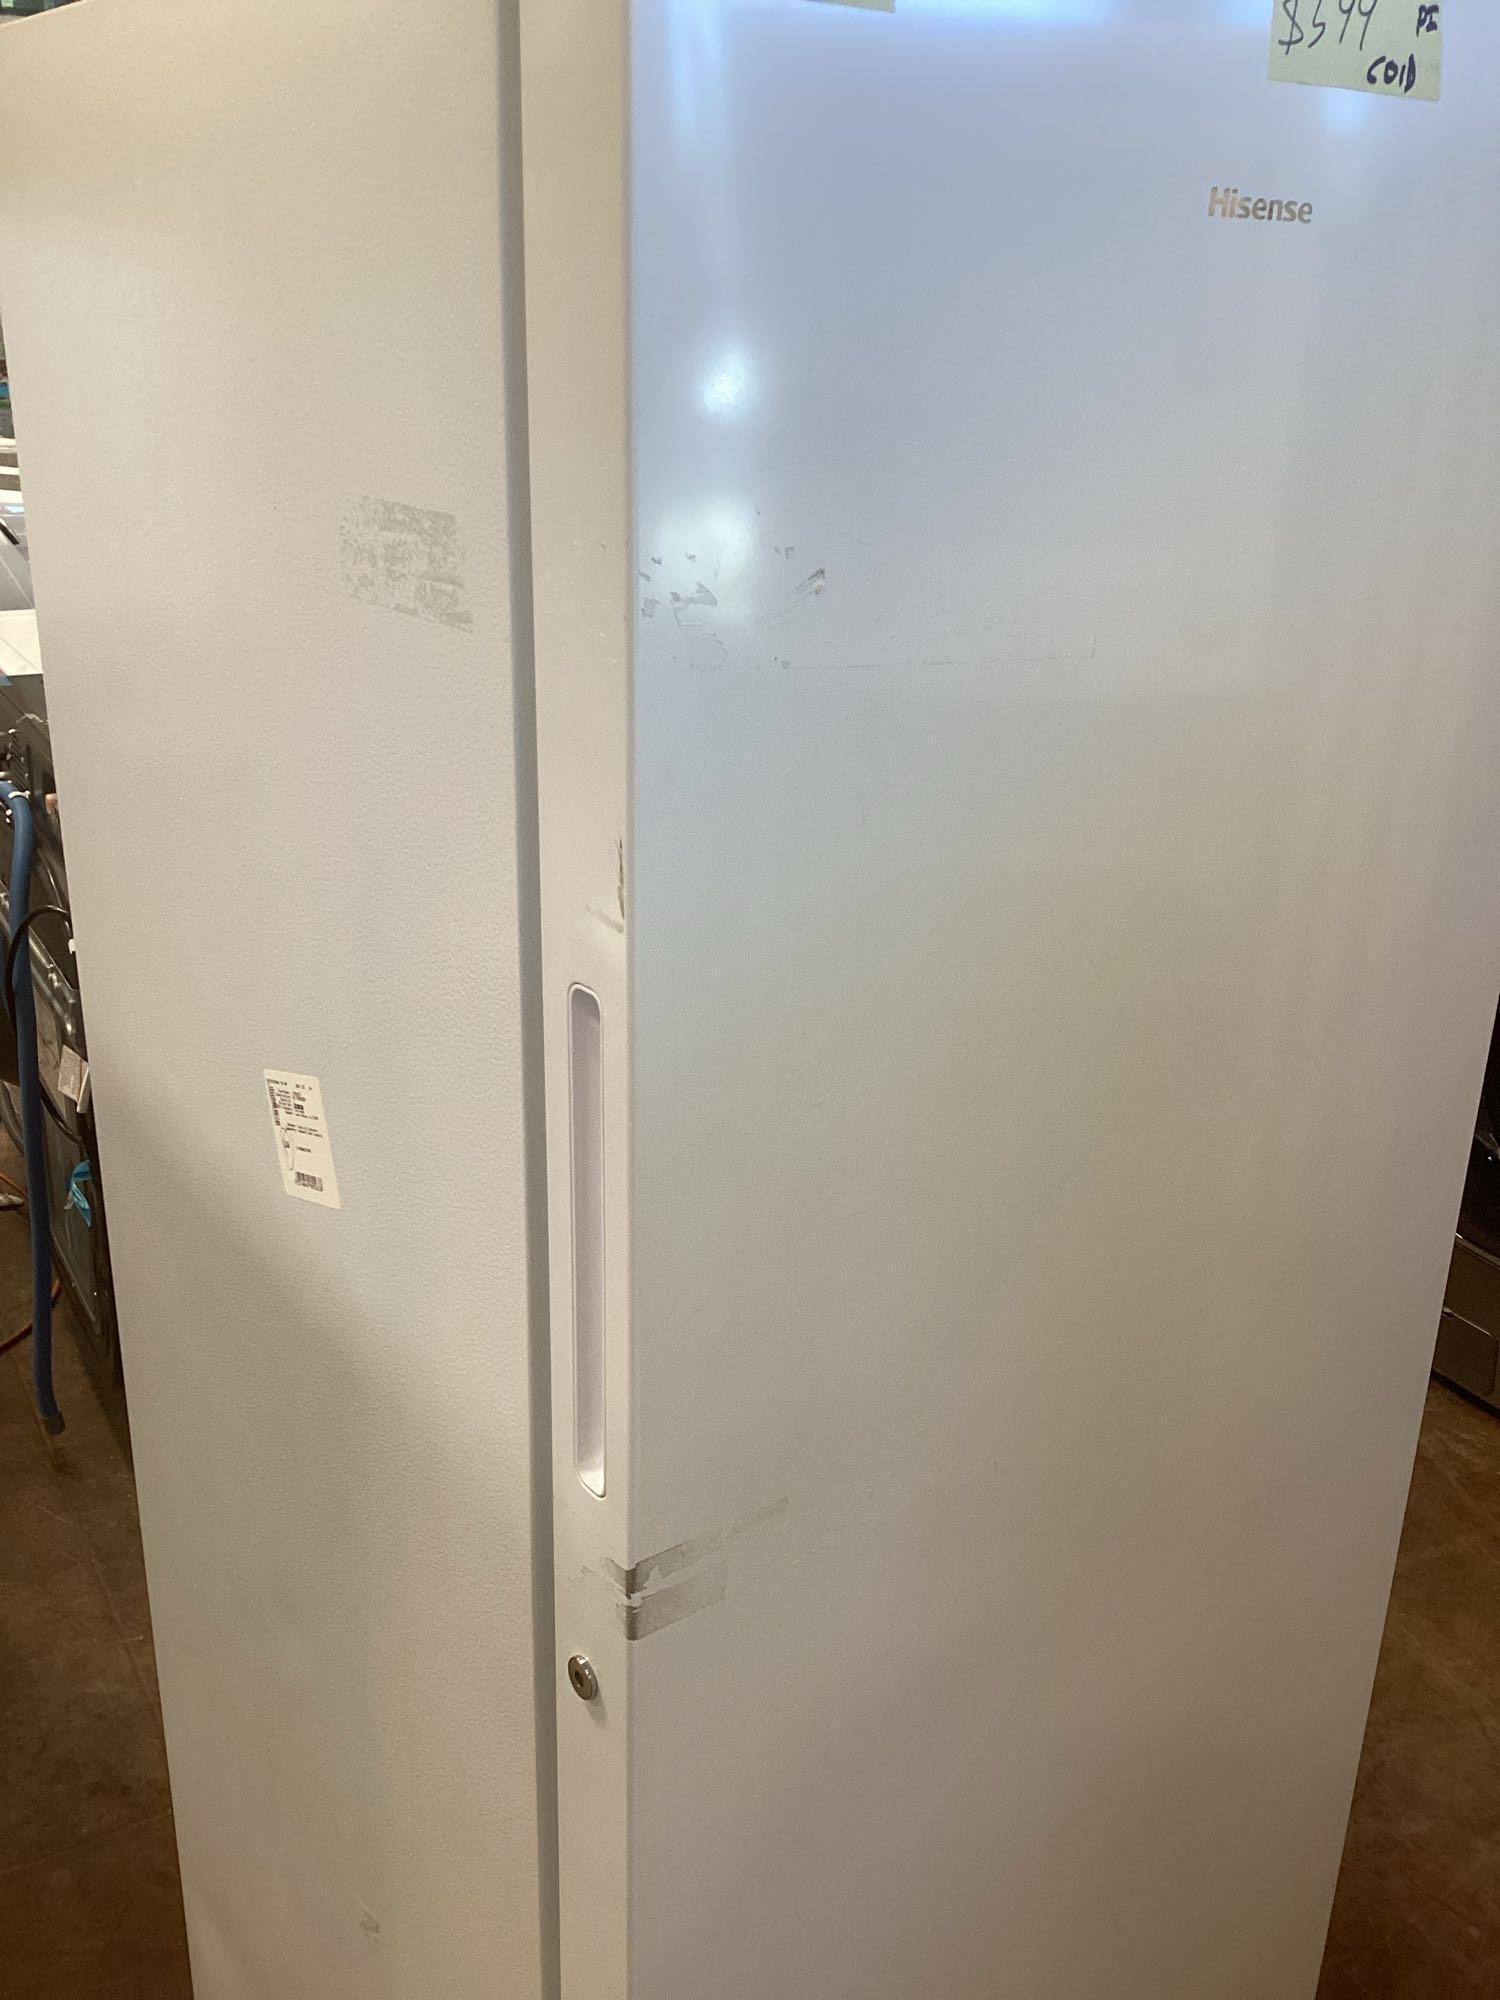 Hisense 13.6 cu. ft. Full Size Upright Freezer*COLD*PREVIOUSLY INSTALLED*